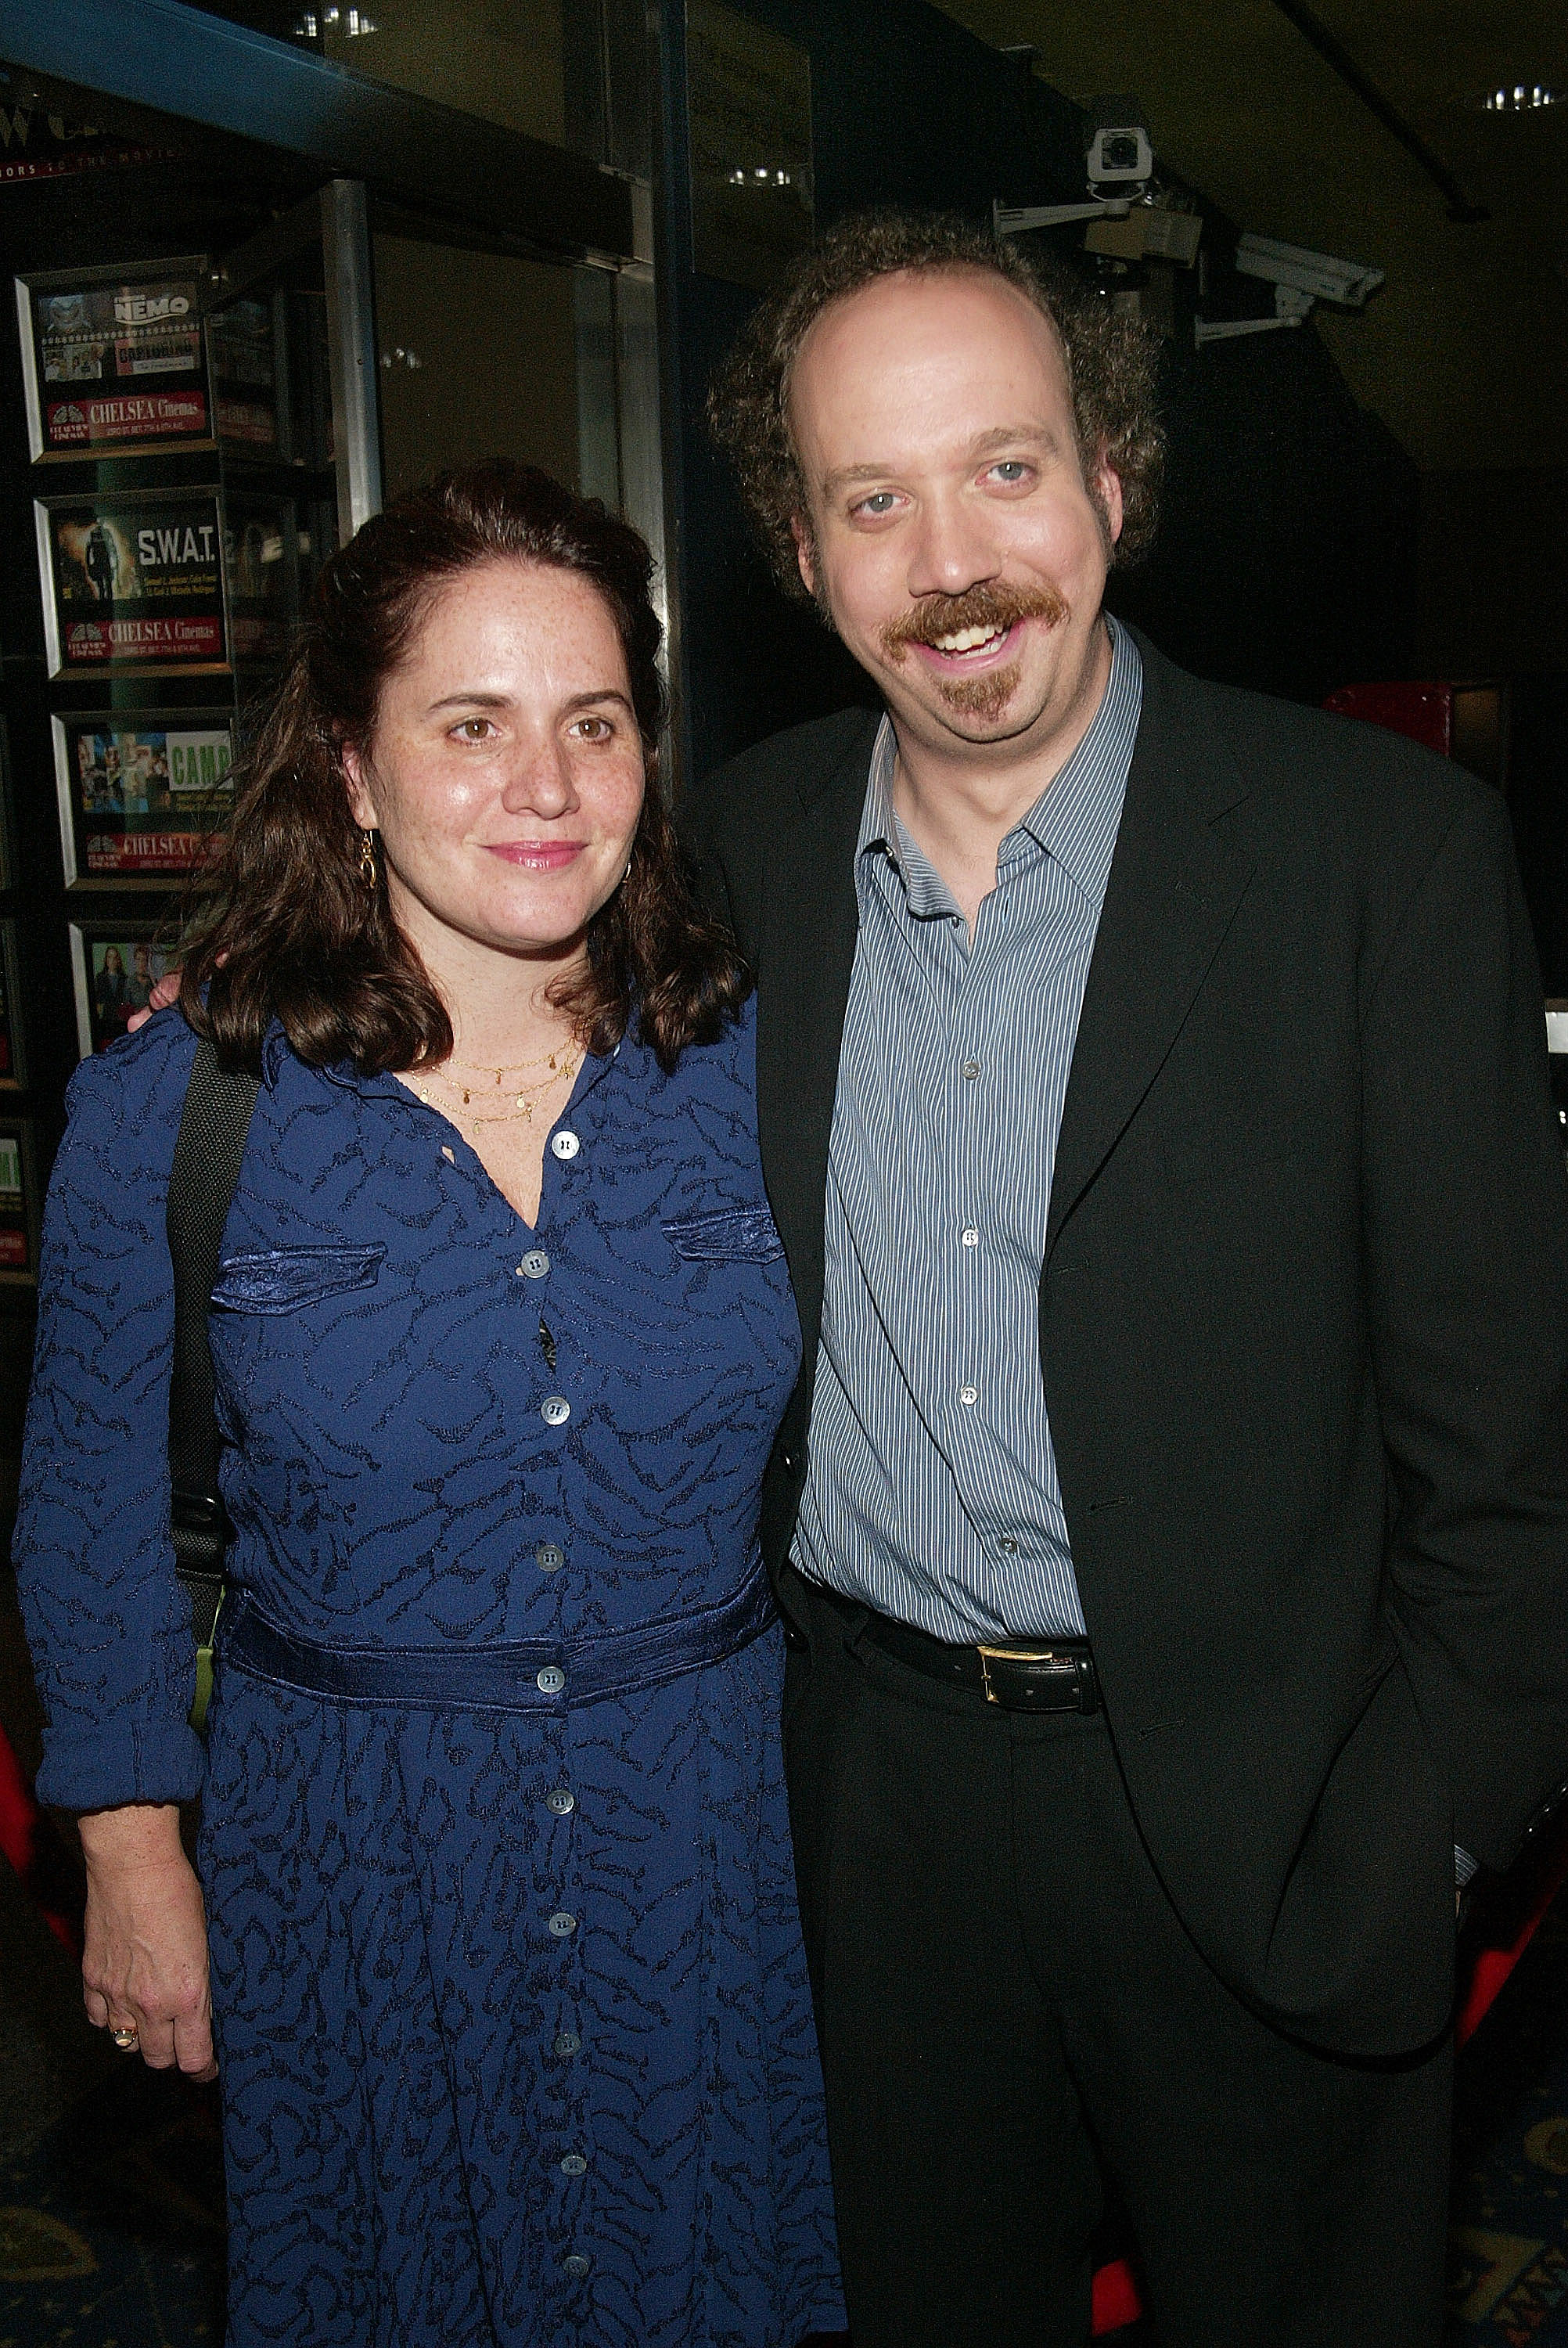 Paul Giamatti and Elizabeth Cohen during the "American Splendor" film premiere at the Chelsea West Theater August 12, 2003, in New York City. | Source: Getty Images